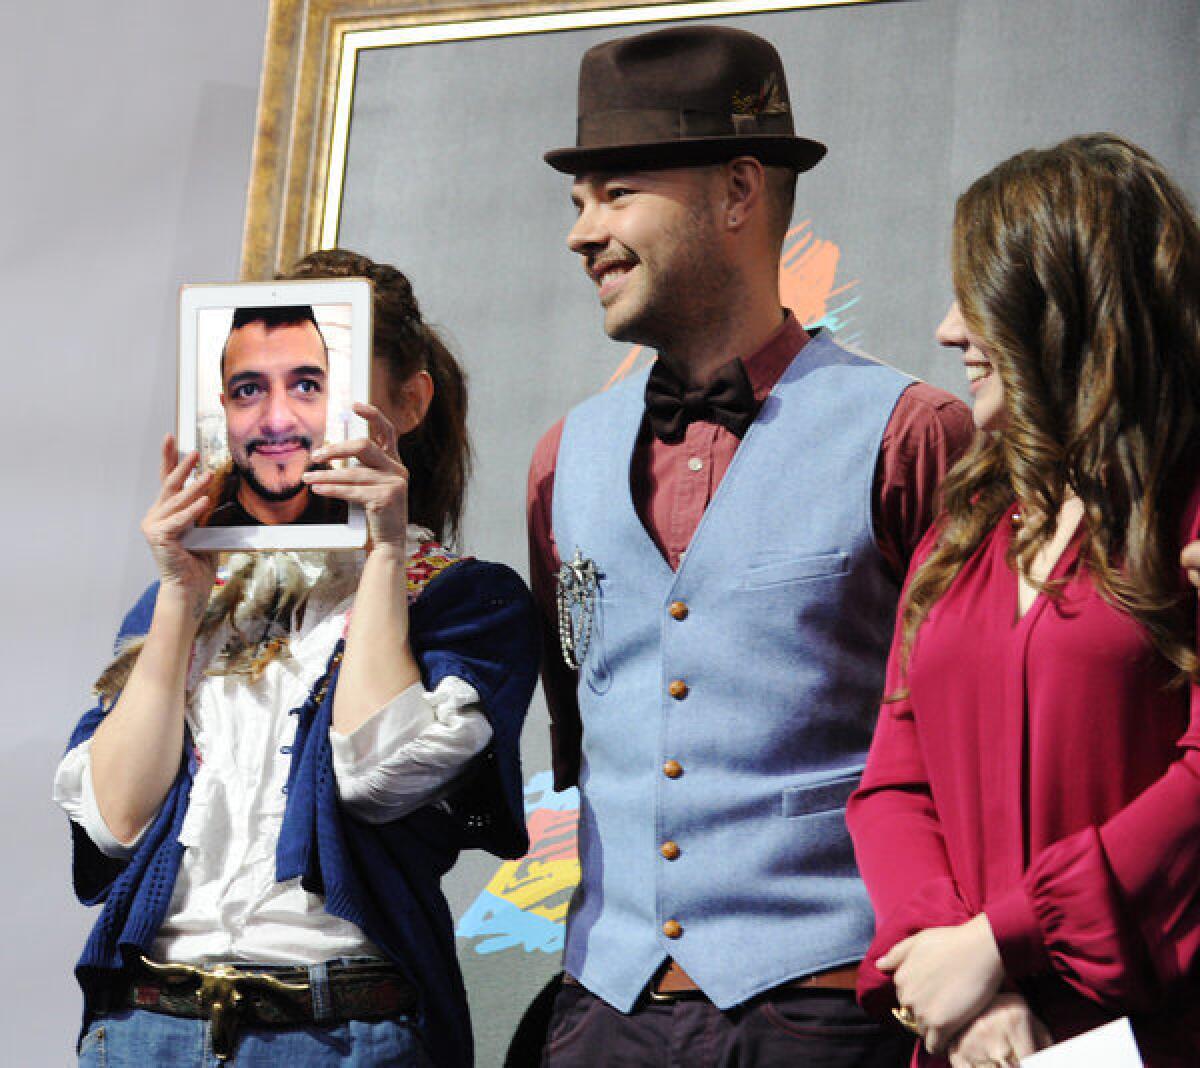 Maria Barracuda, left, of the Mexican pop group Jotdog hides behind a live iPad image of her Jotdog partner Jorge "La Chiquis" Amaro at the 13th annual Latin Grammy Awards nominations press conference in L.A. last September. With her are Jesse, center, and Joy Huerta of the Mexican pop duo Jesse & Joy.